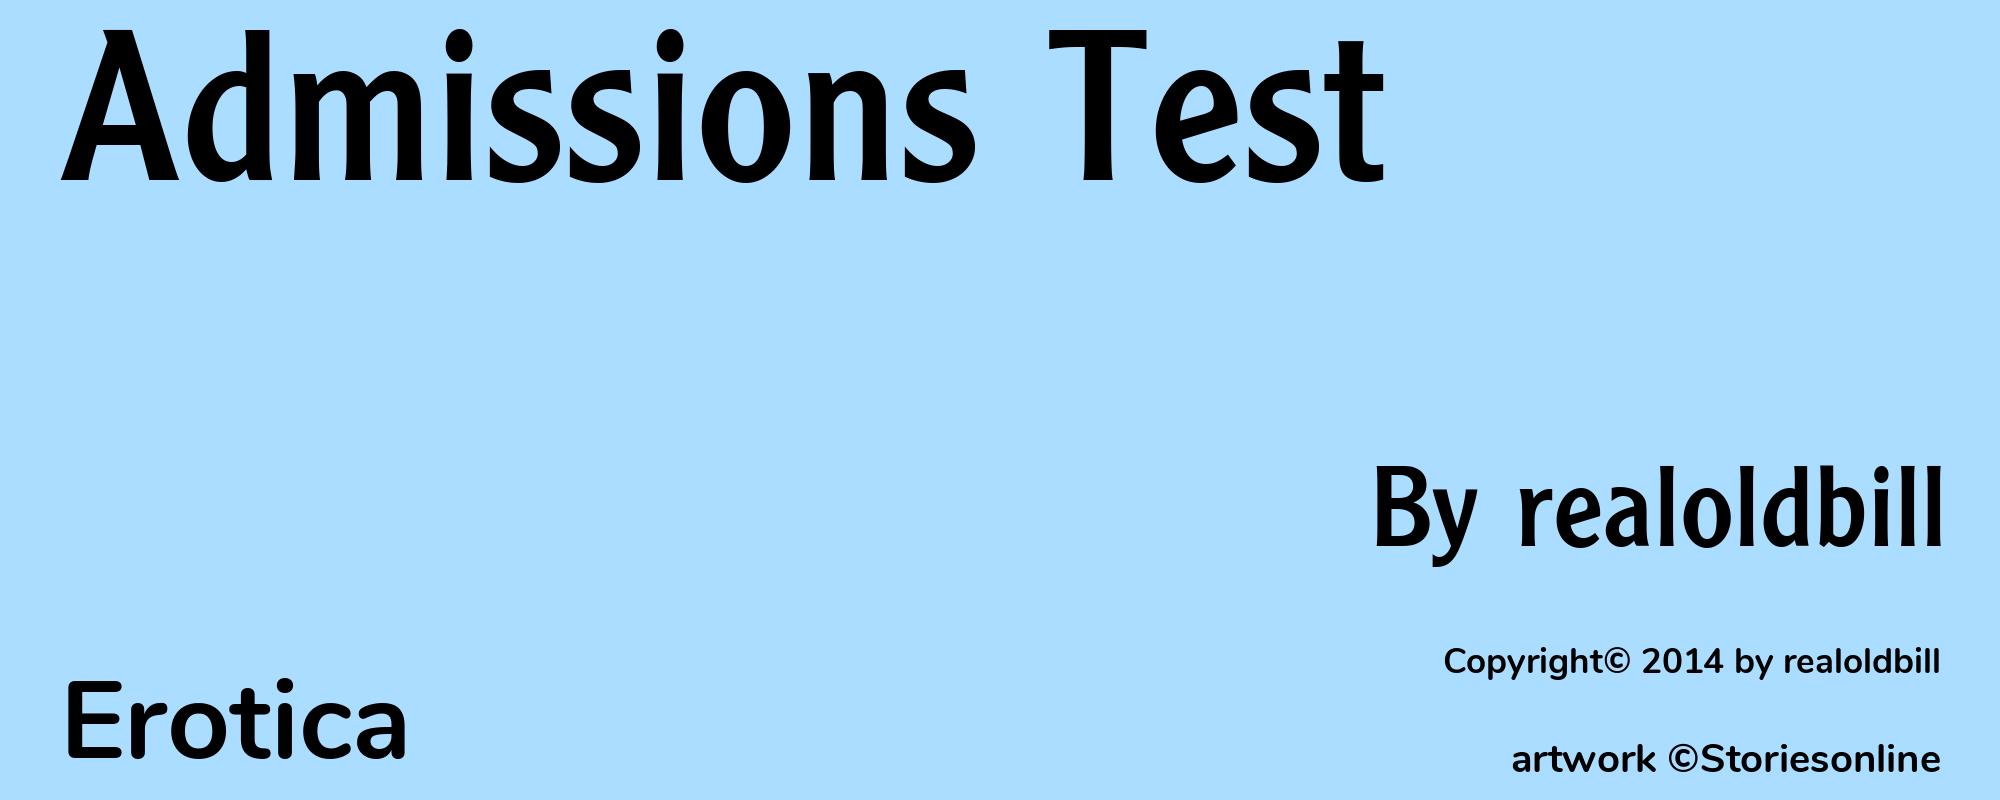 Admissions Test - Cover